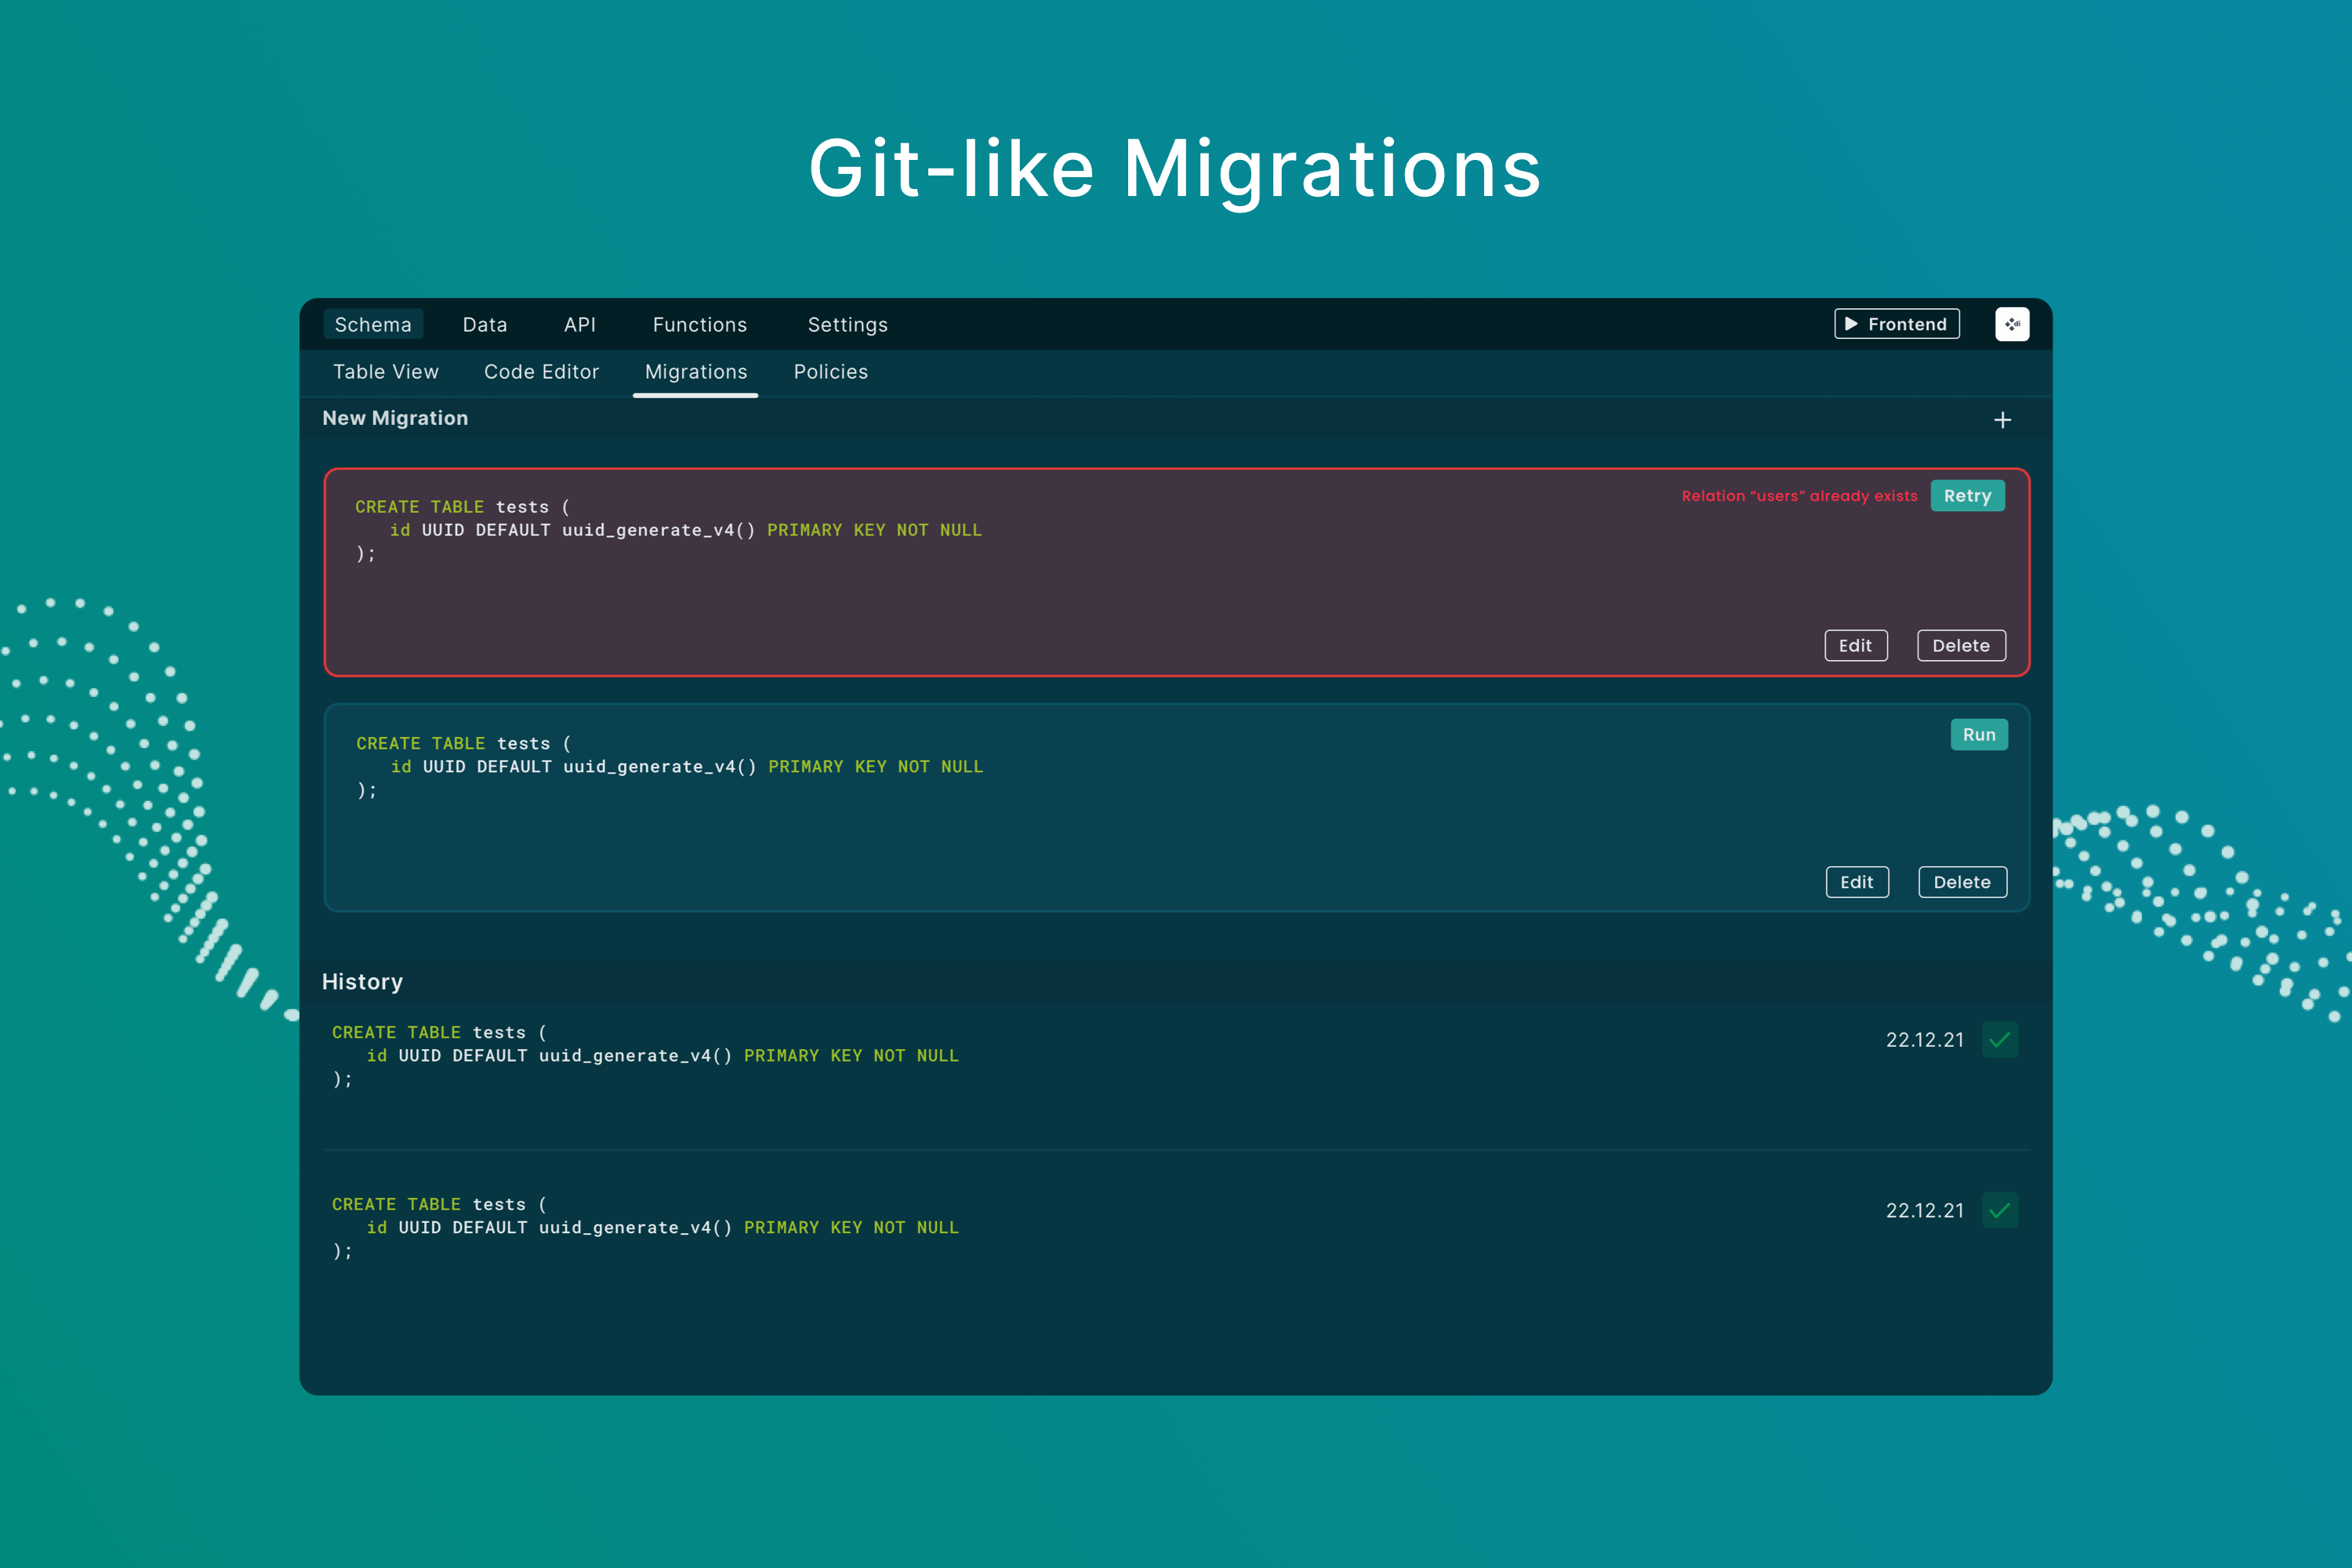 Git-like Migrations in Thin